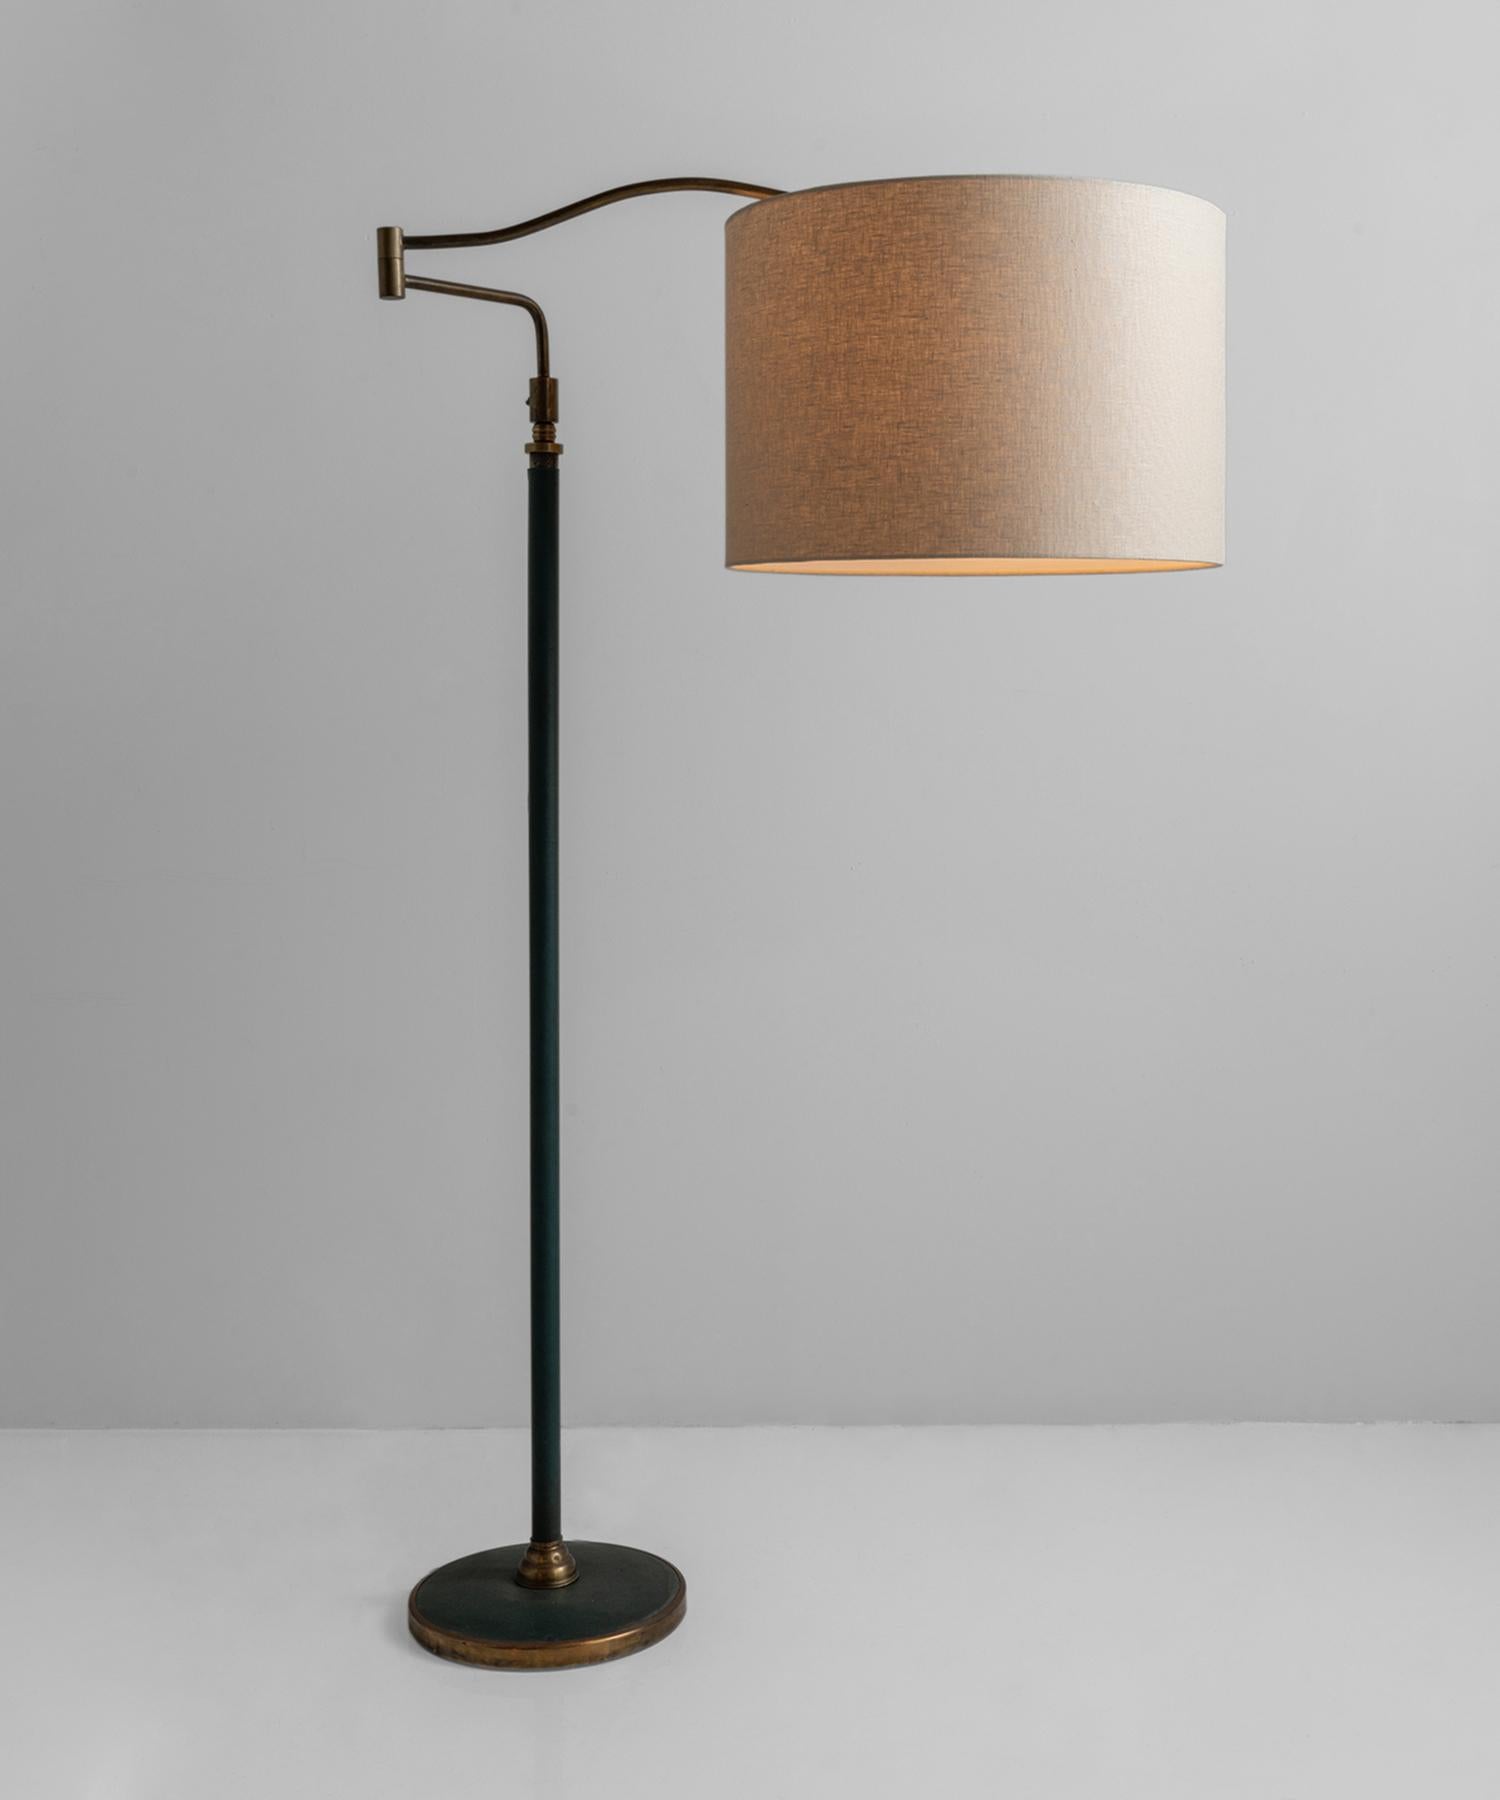 Brass & green leather floor lamp, Italy, 1950.

Leather-wrapped stand includes brass detailing throughout and multiple points of adjustment. New linen shade.